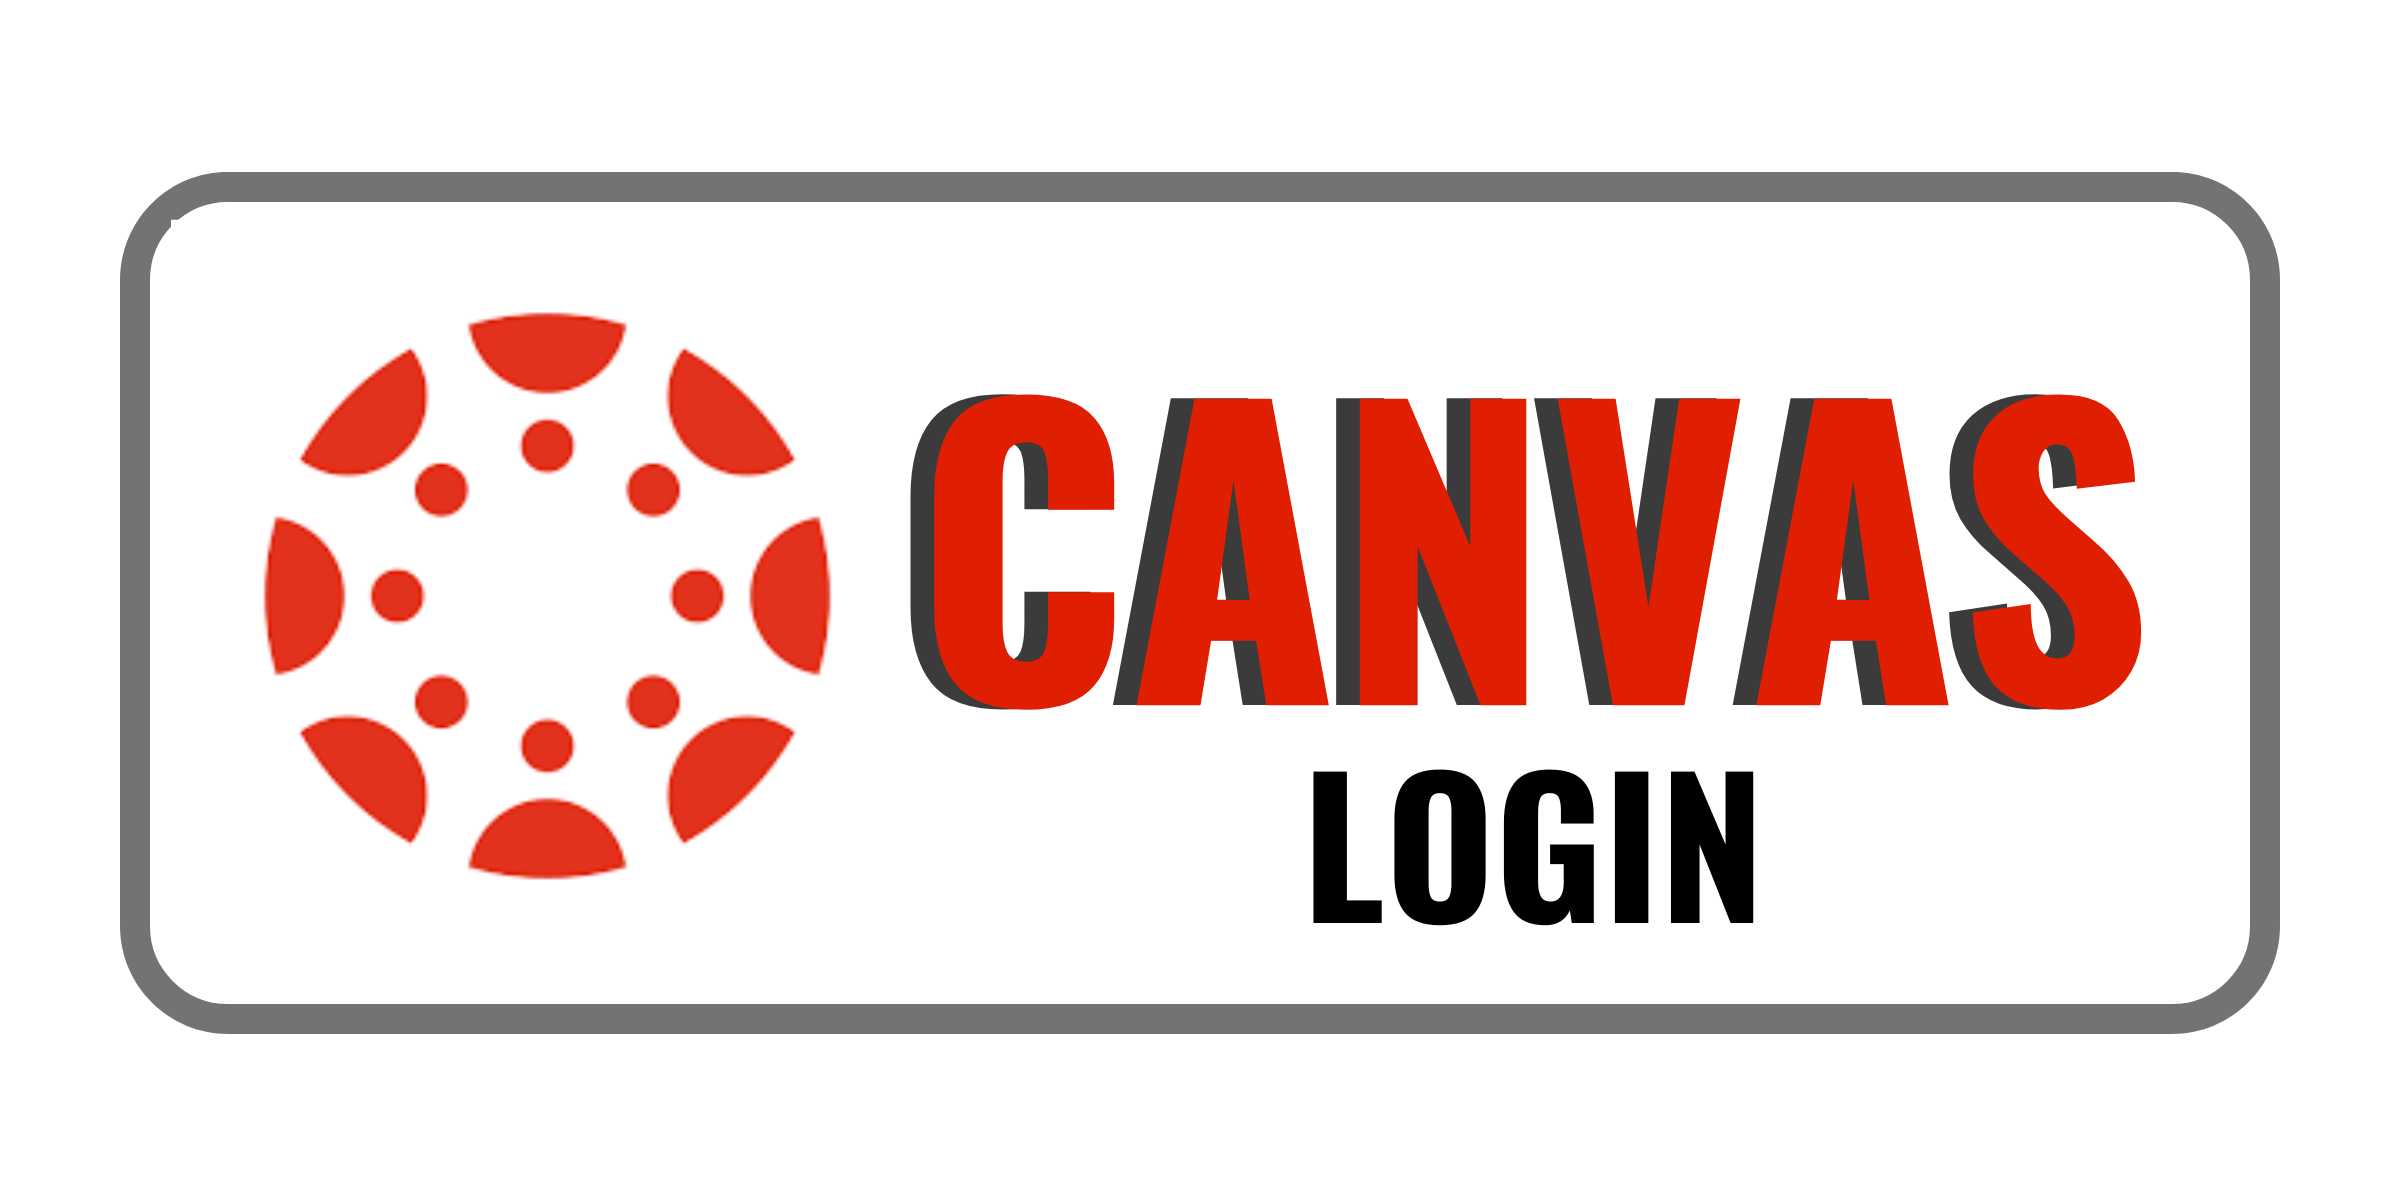 Canvas Login Image and Link